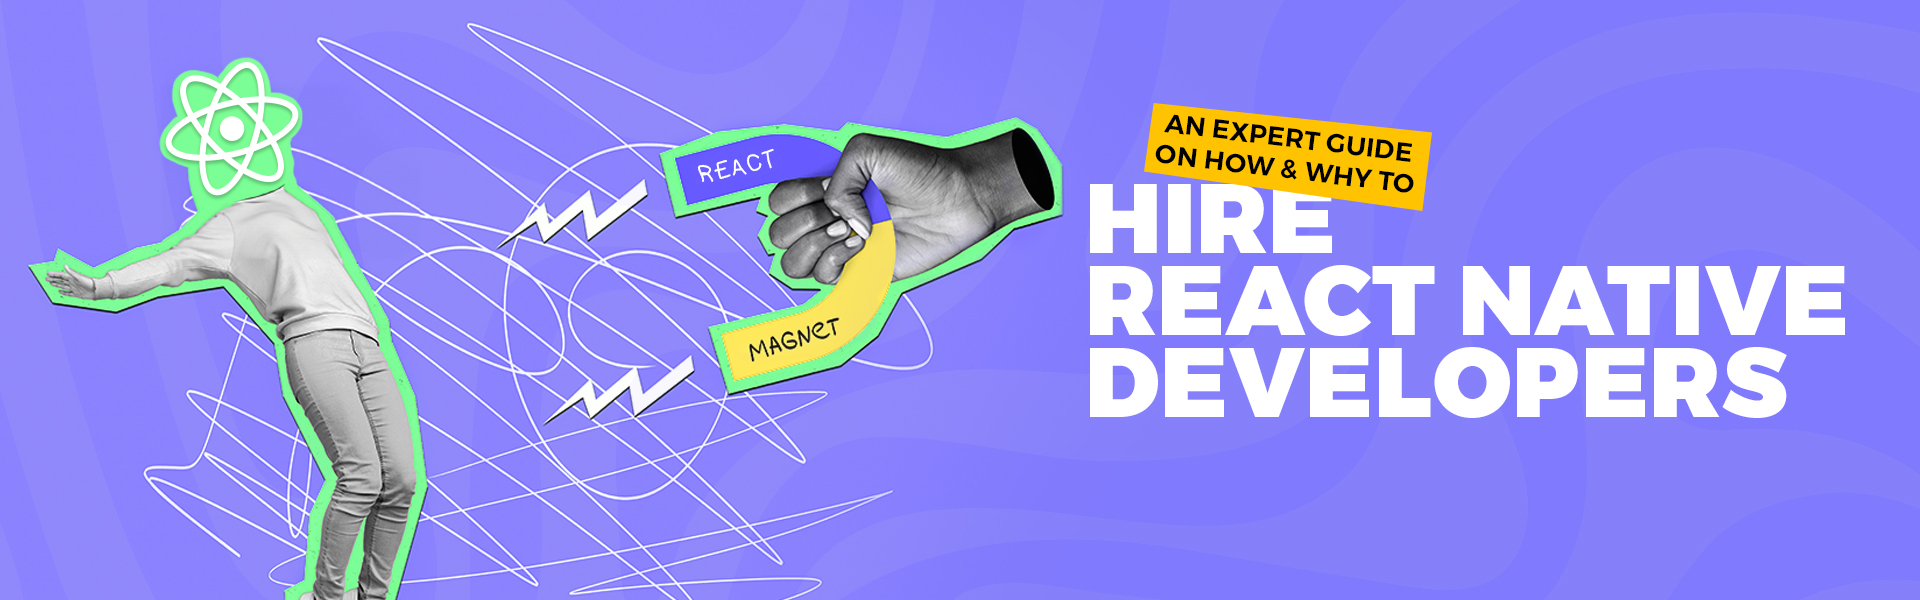 CC_An Expert Guide on How & Why to Hire React Native Developers_main banner